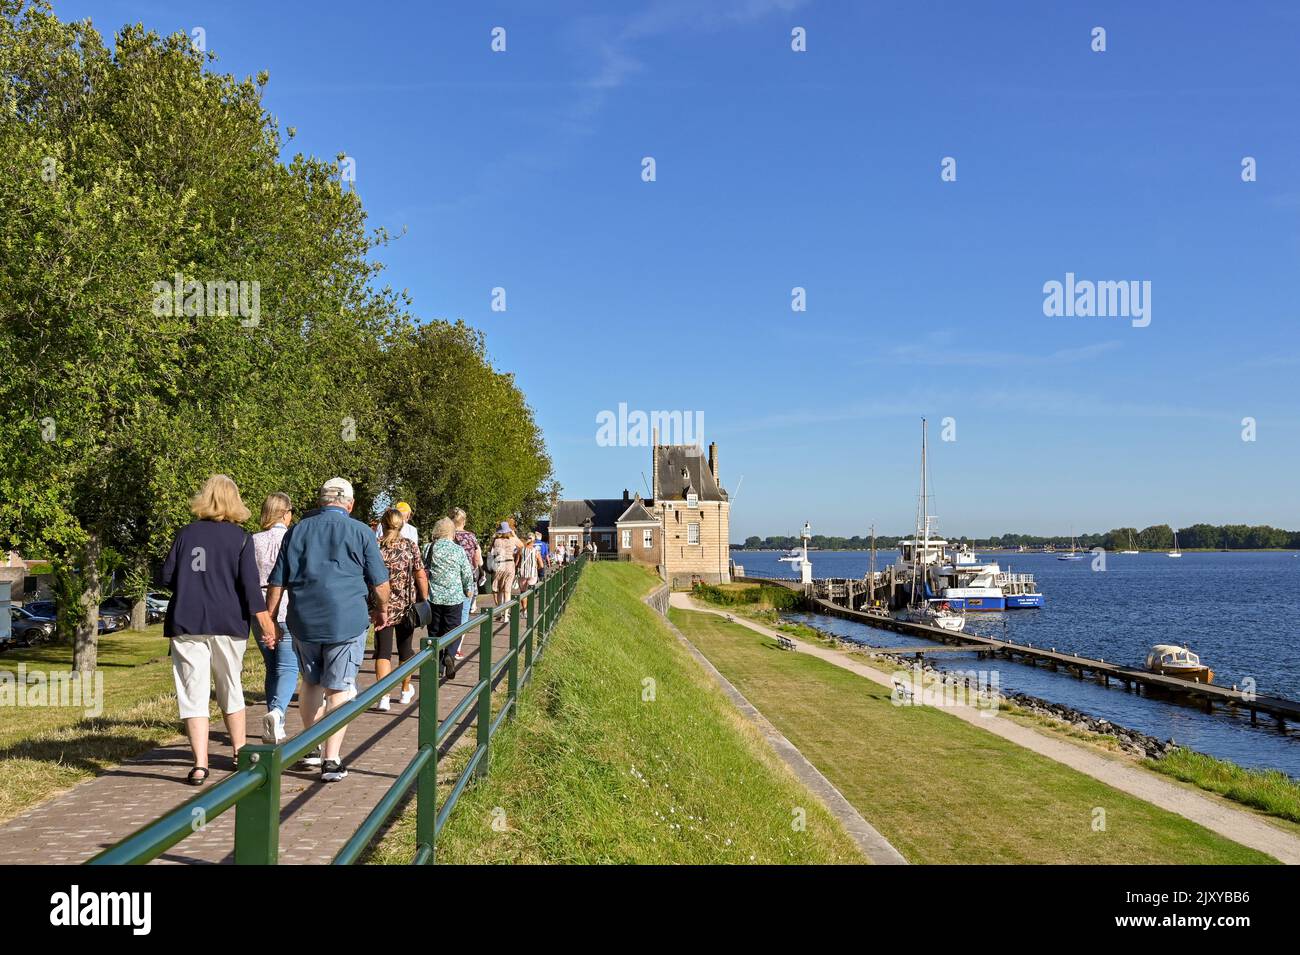 Veere, Netherlands - August 2022: Group of people walking along a footpath to visit the town Stock Photo